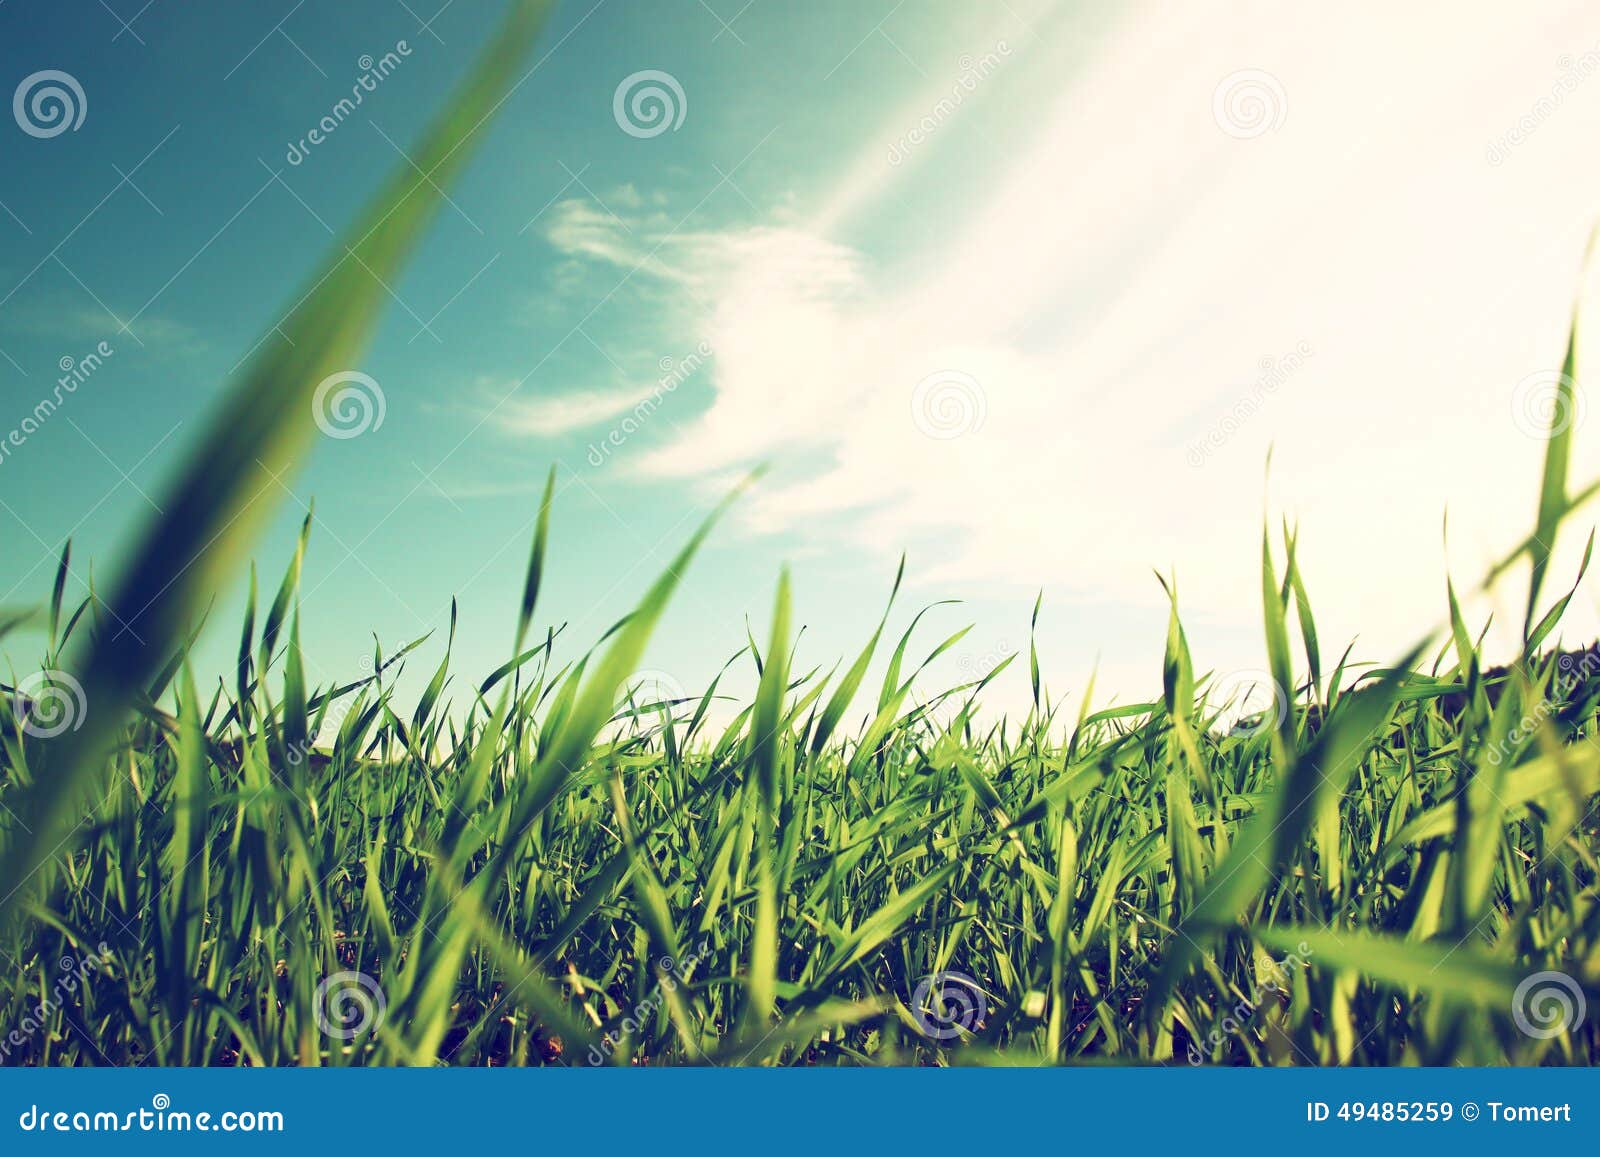 low angle view of fresh grass against blue sky with clouds.